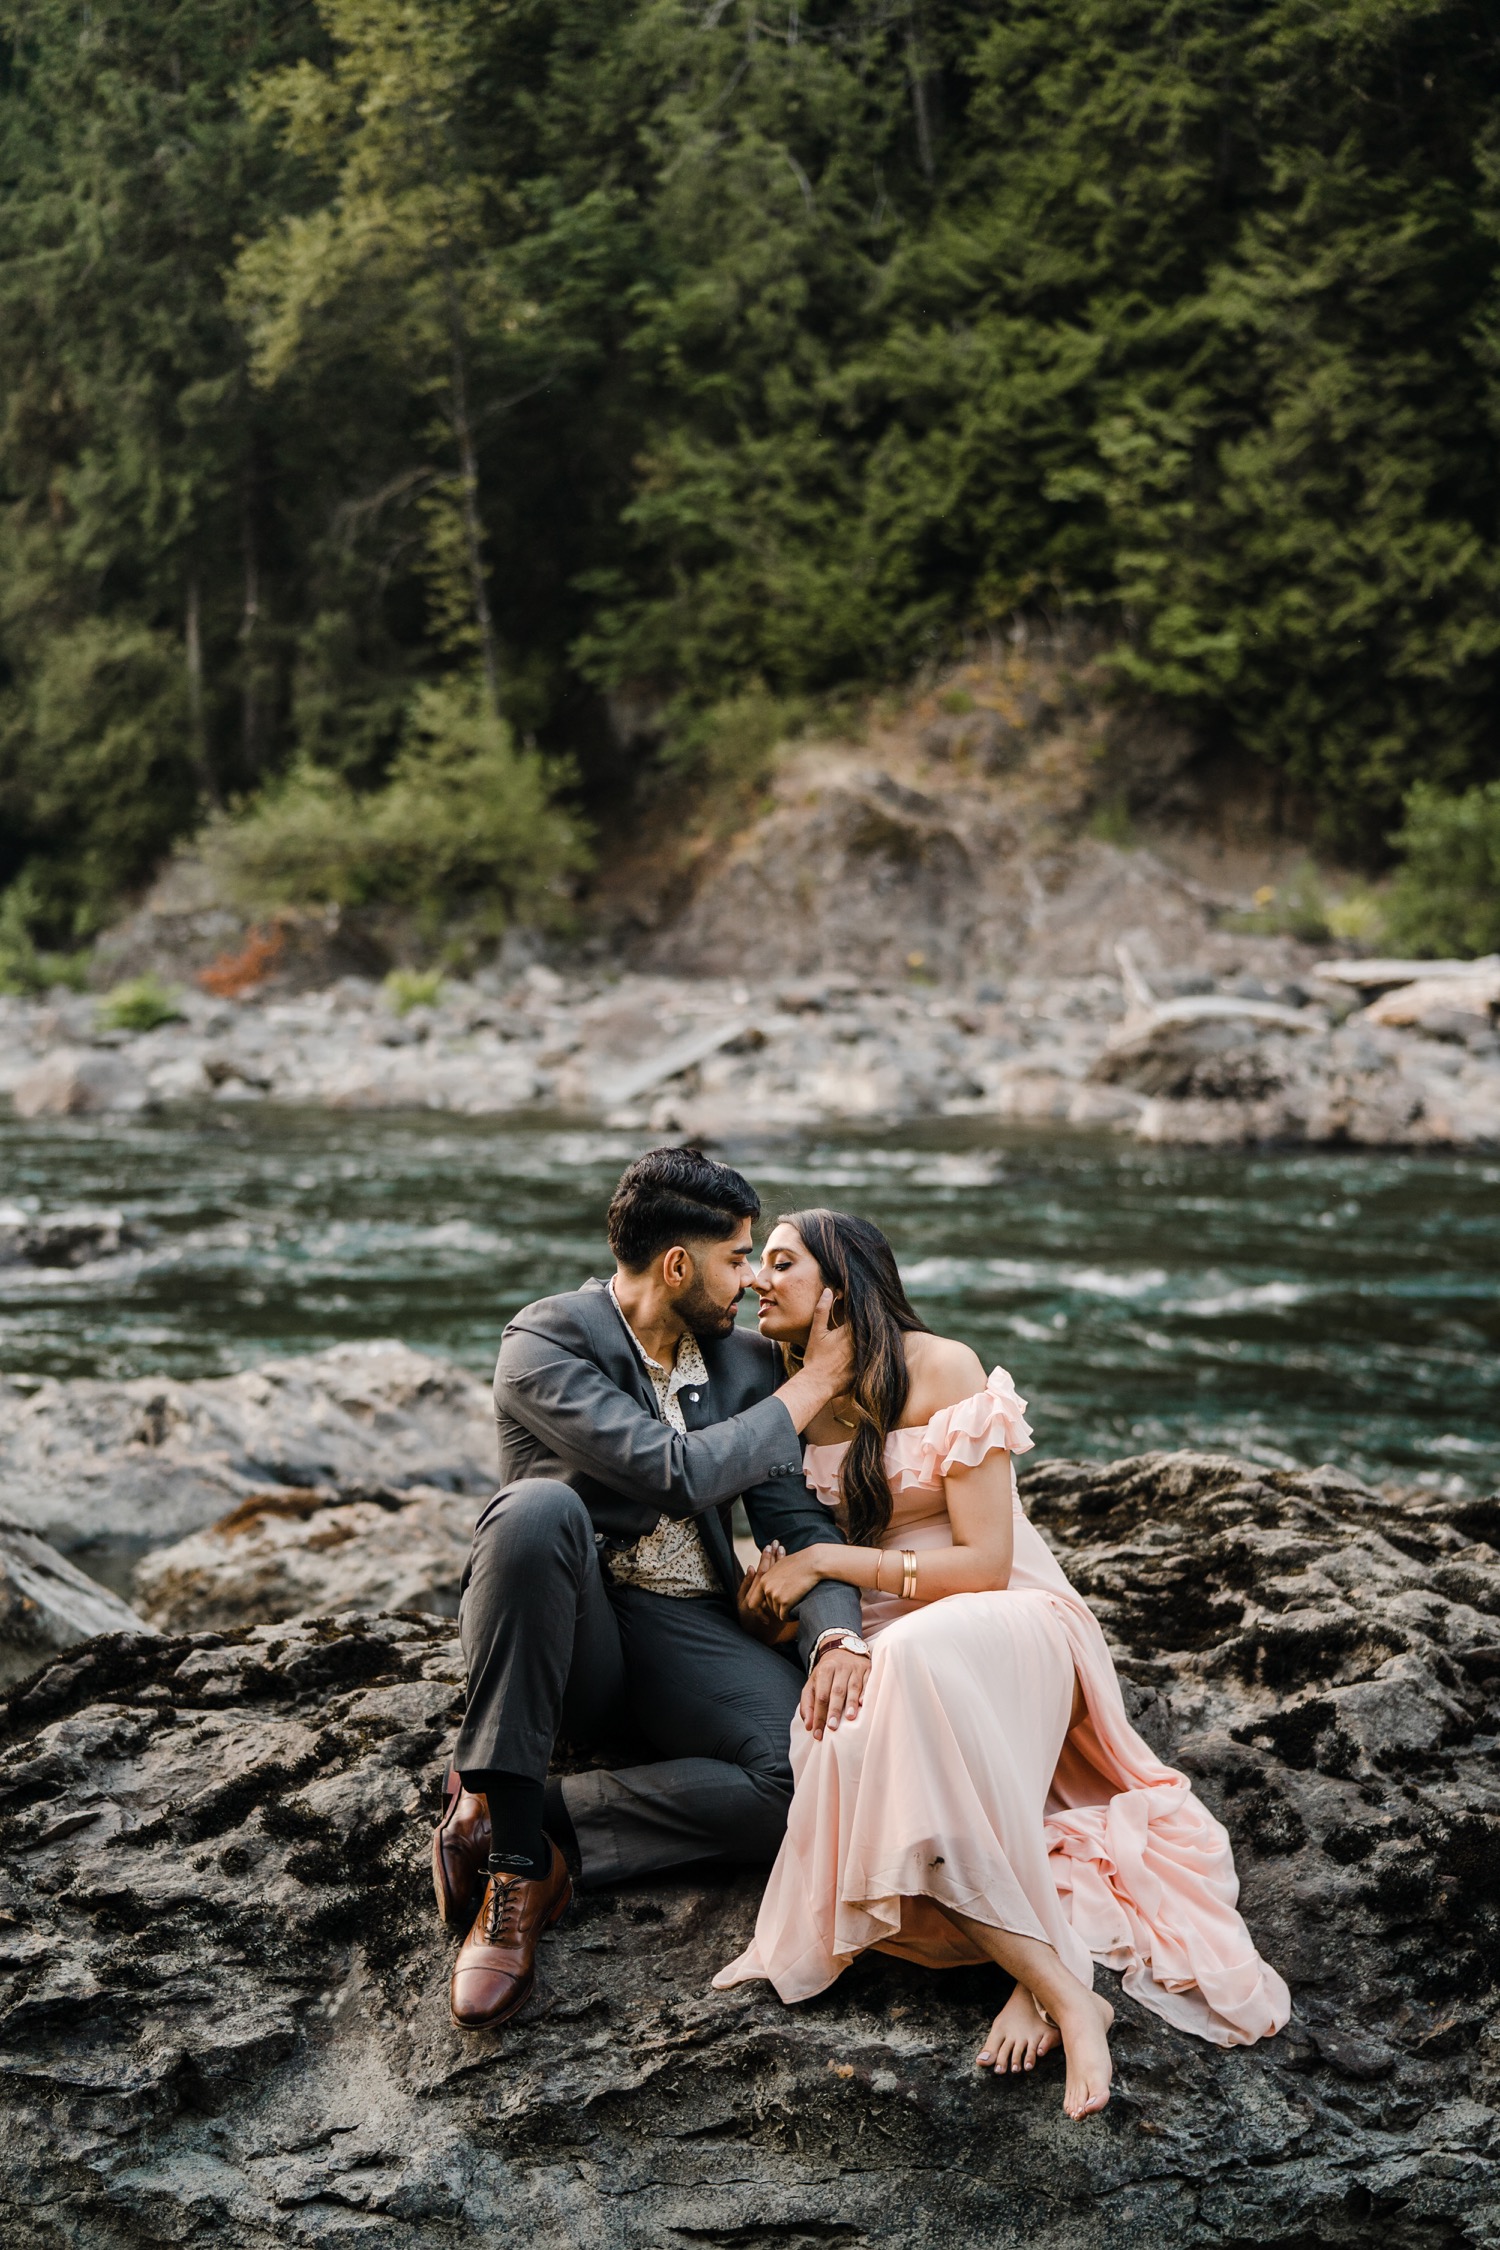 Couple leaning in for a kiss while sitting on rocks in the river.